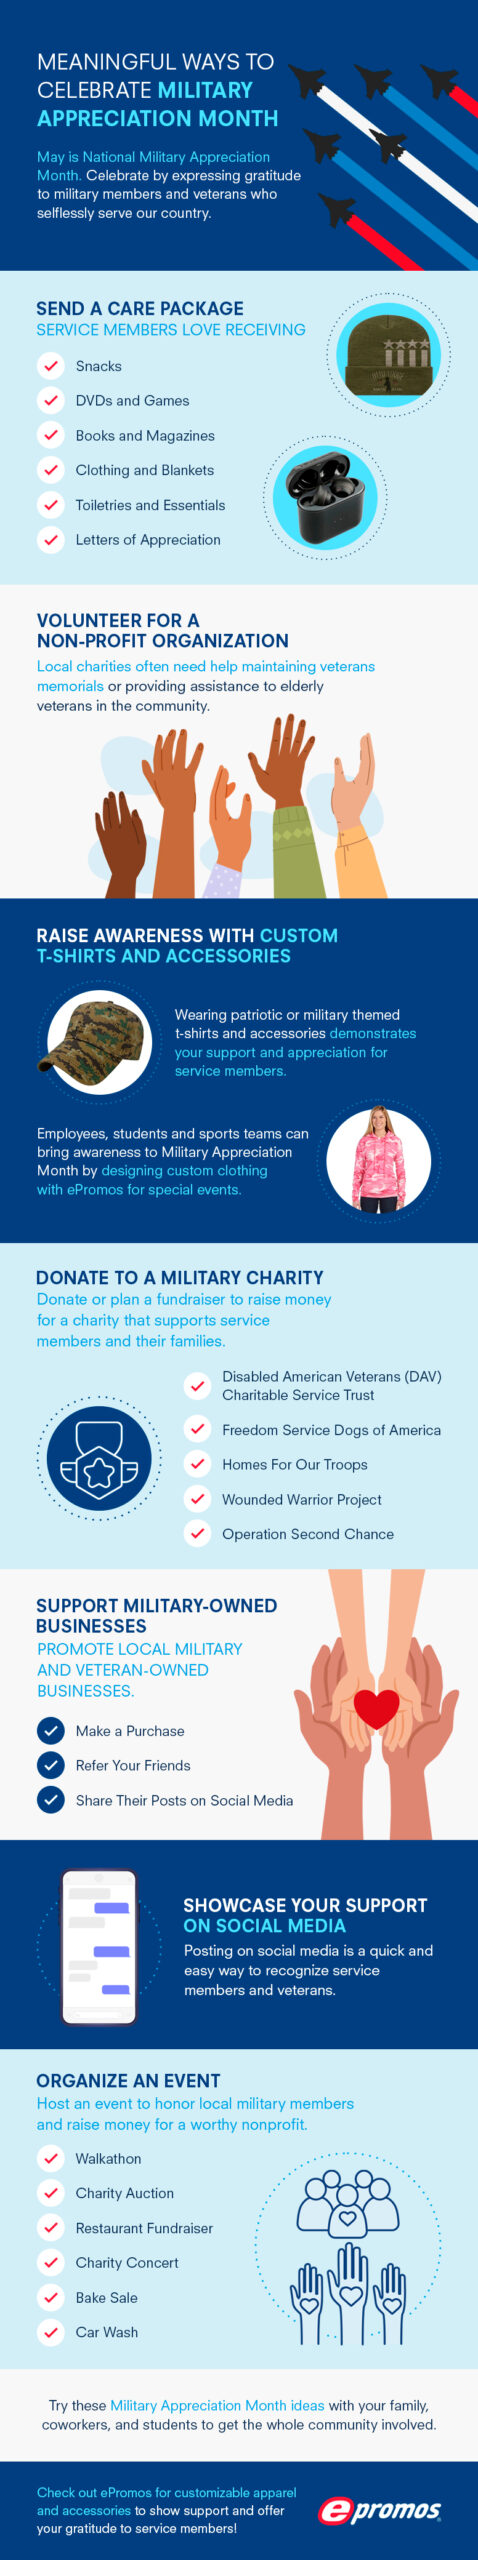 Meaningful-ways-to-celebrate-military-appreciation-month